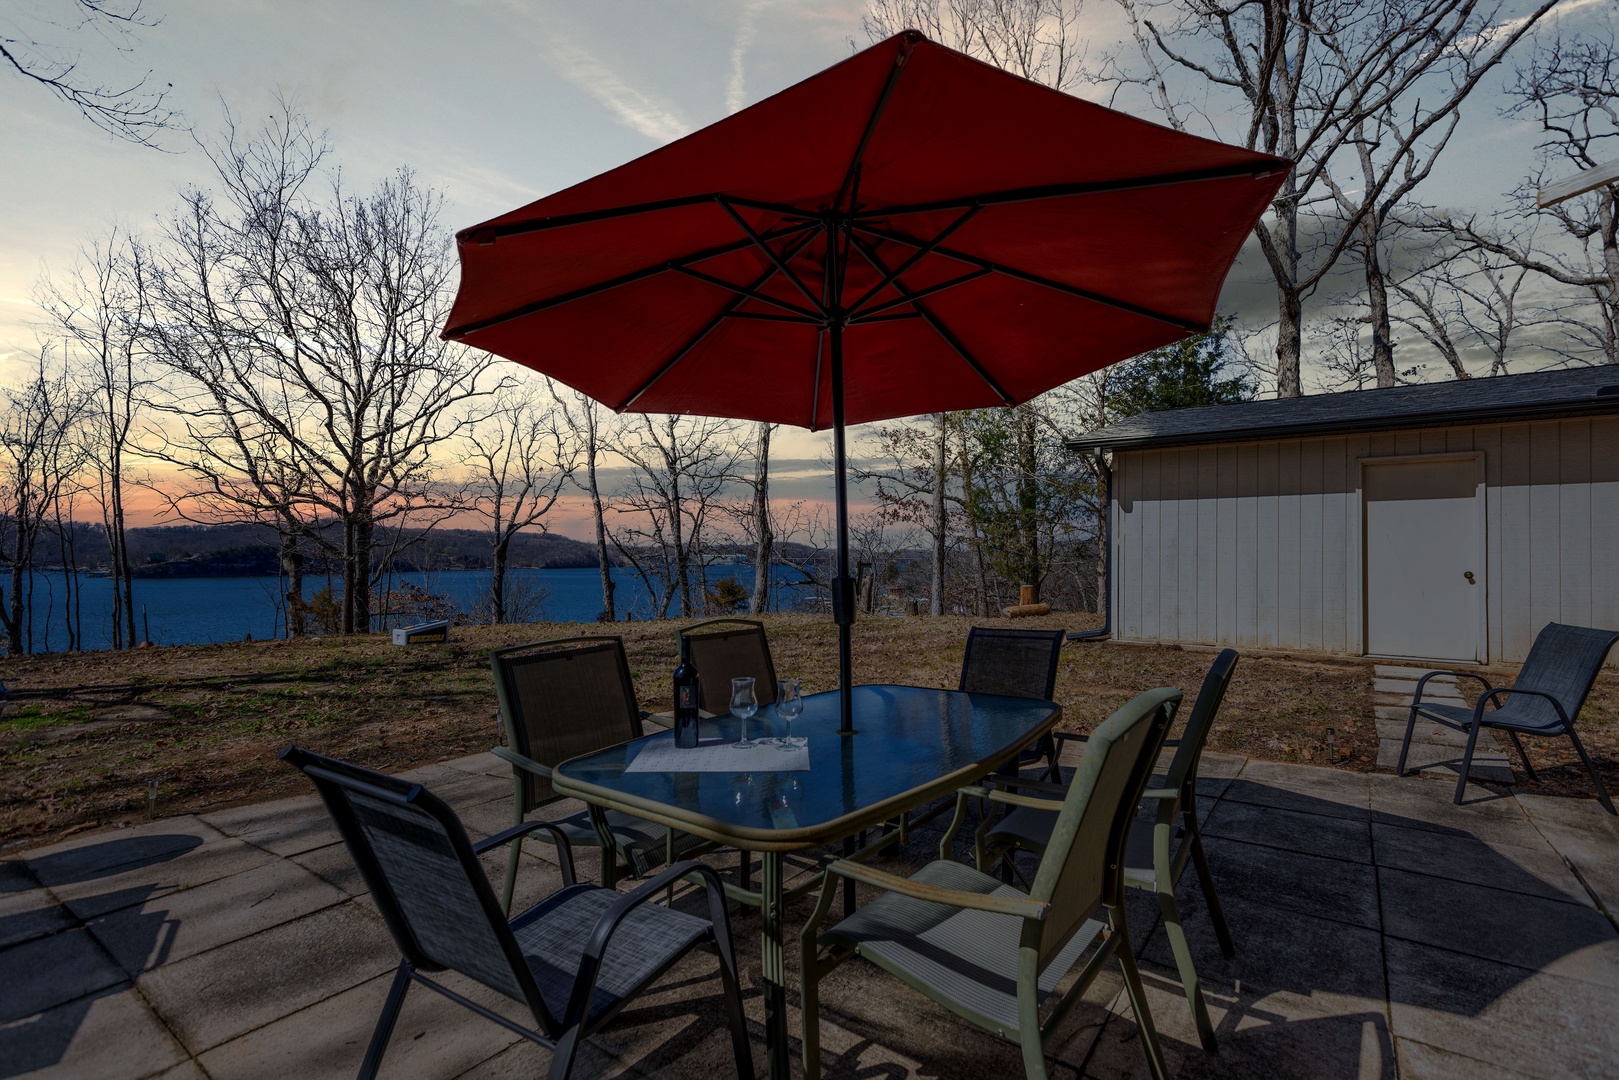 Enjoy the stunning sunset lake view from the patio!